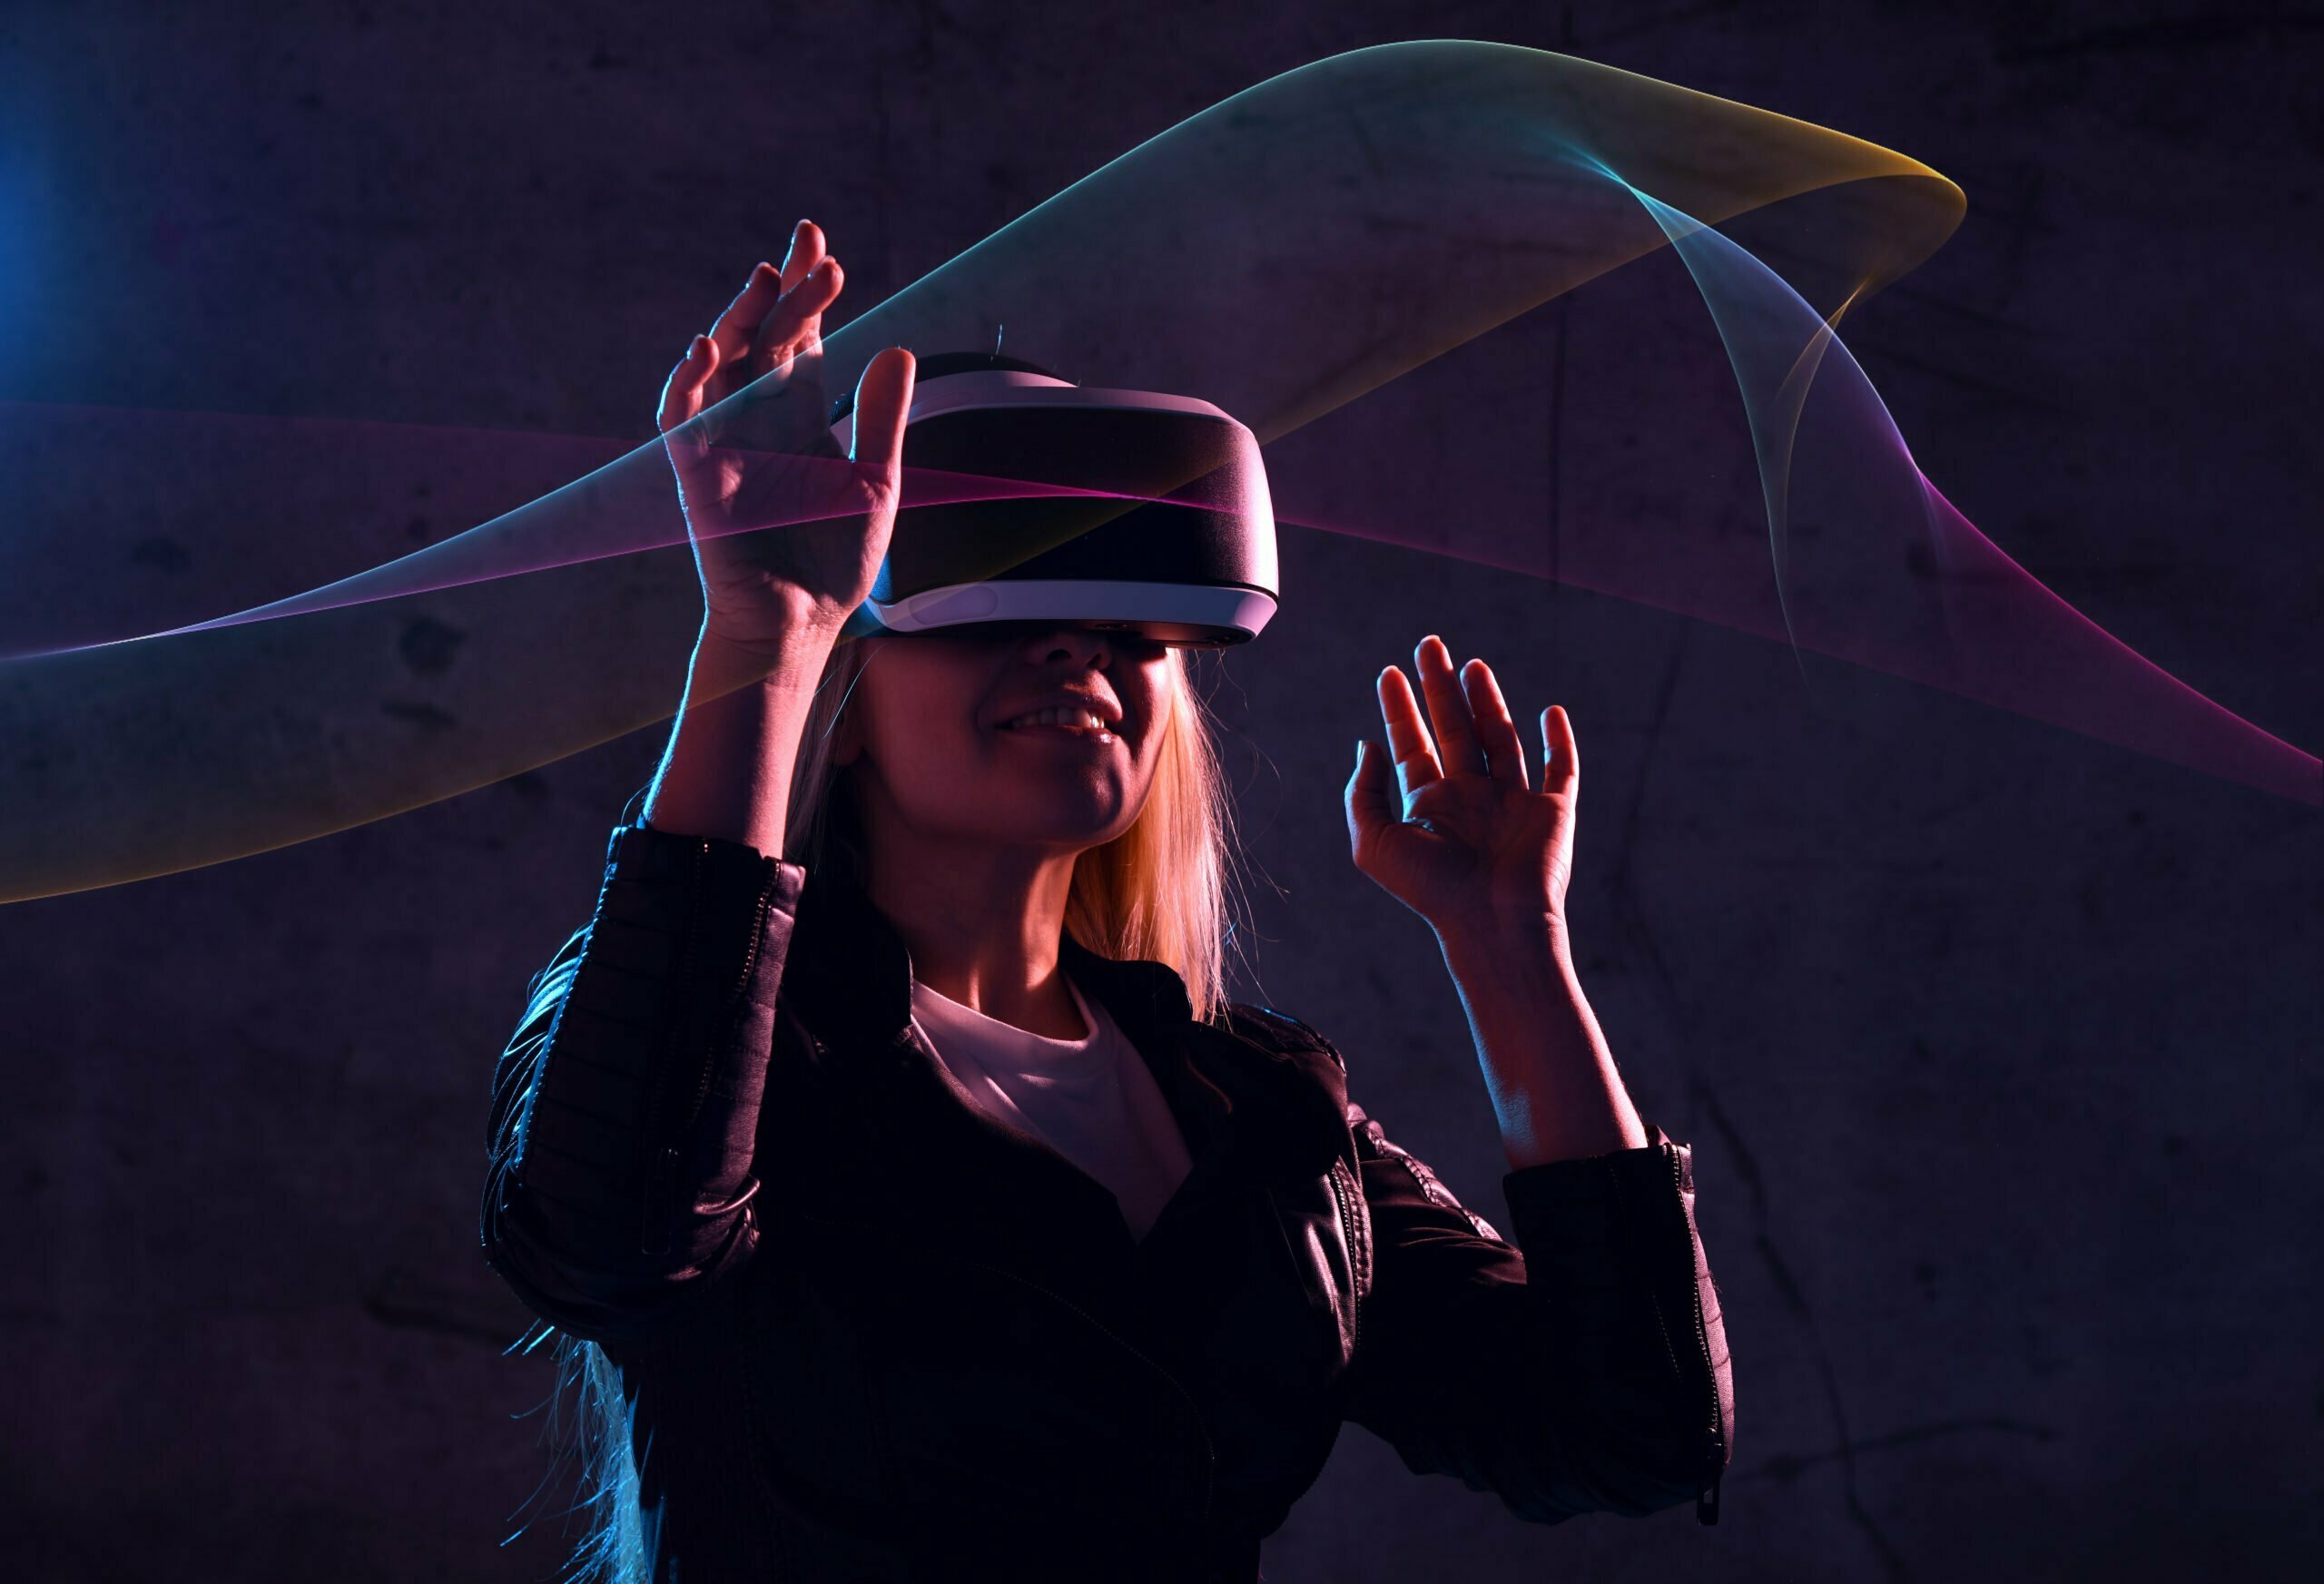 Young girl play virtual reality game wear vr glasses and explore alternative reality. woman in cyber space and virtual gaming